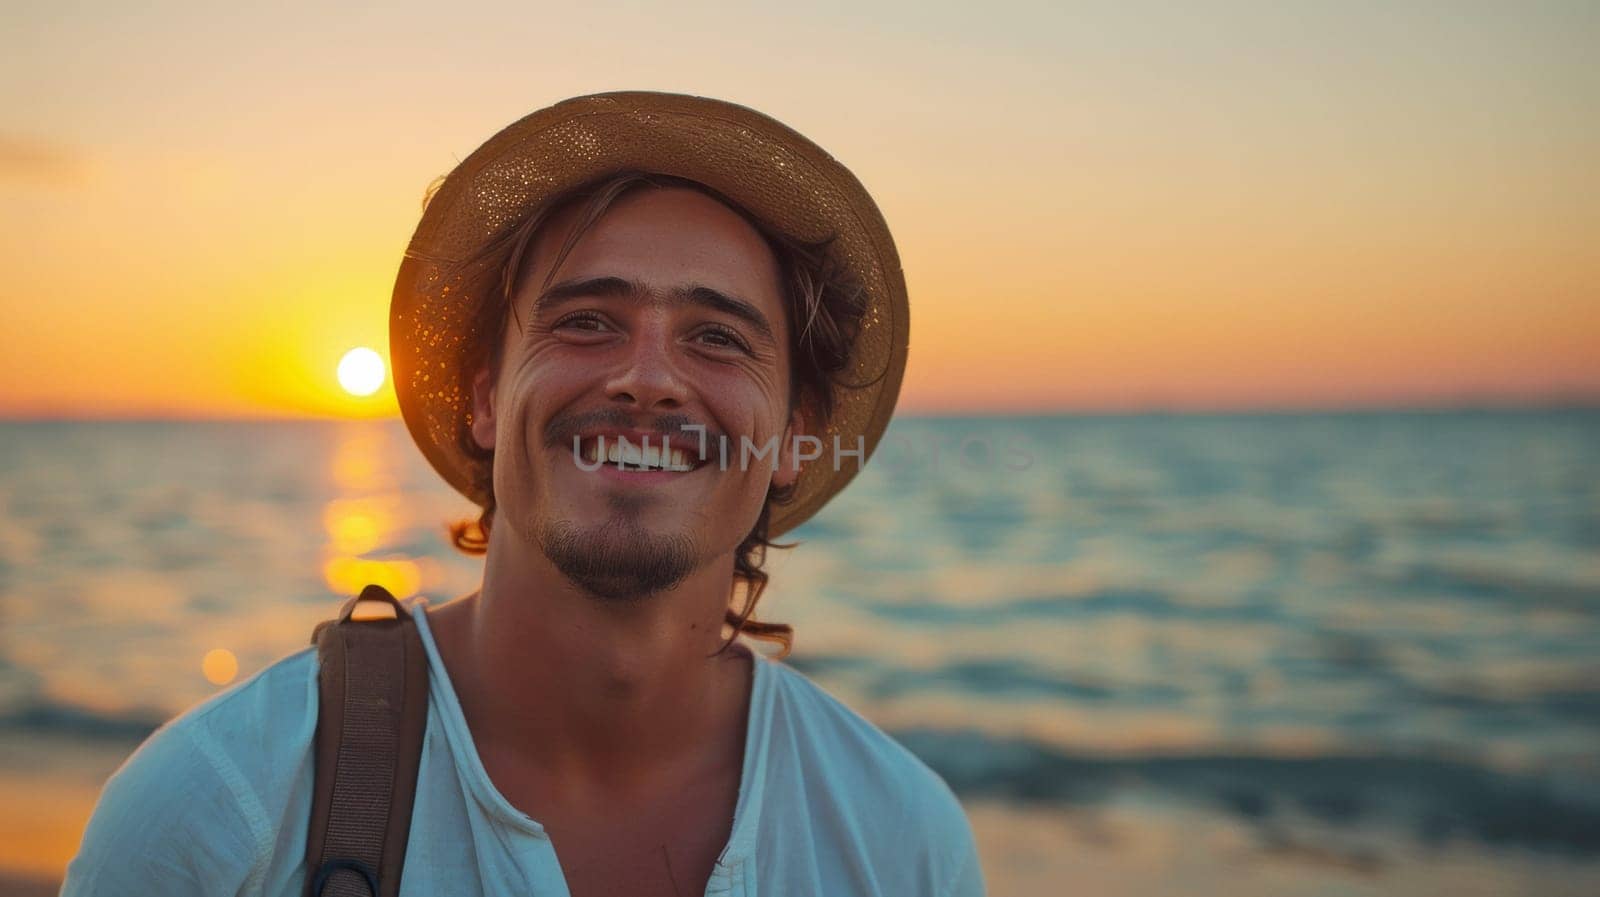 A man smiling at the sun while standing on a beach